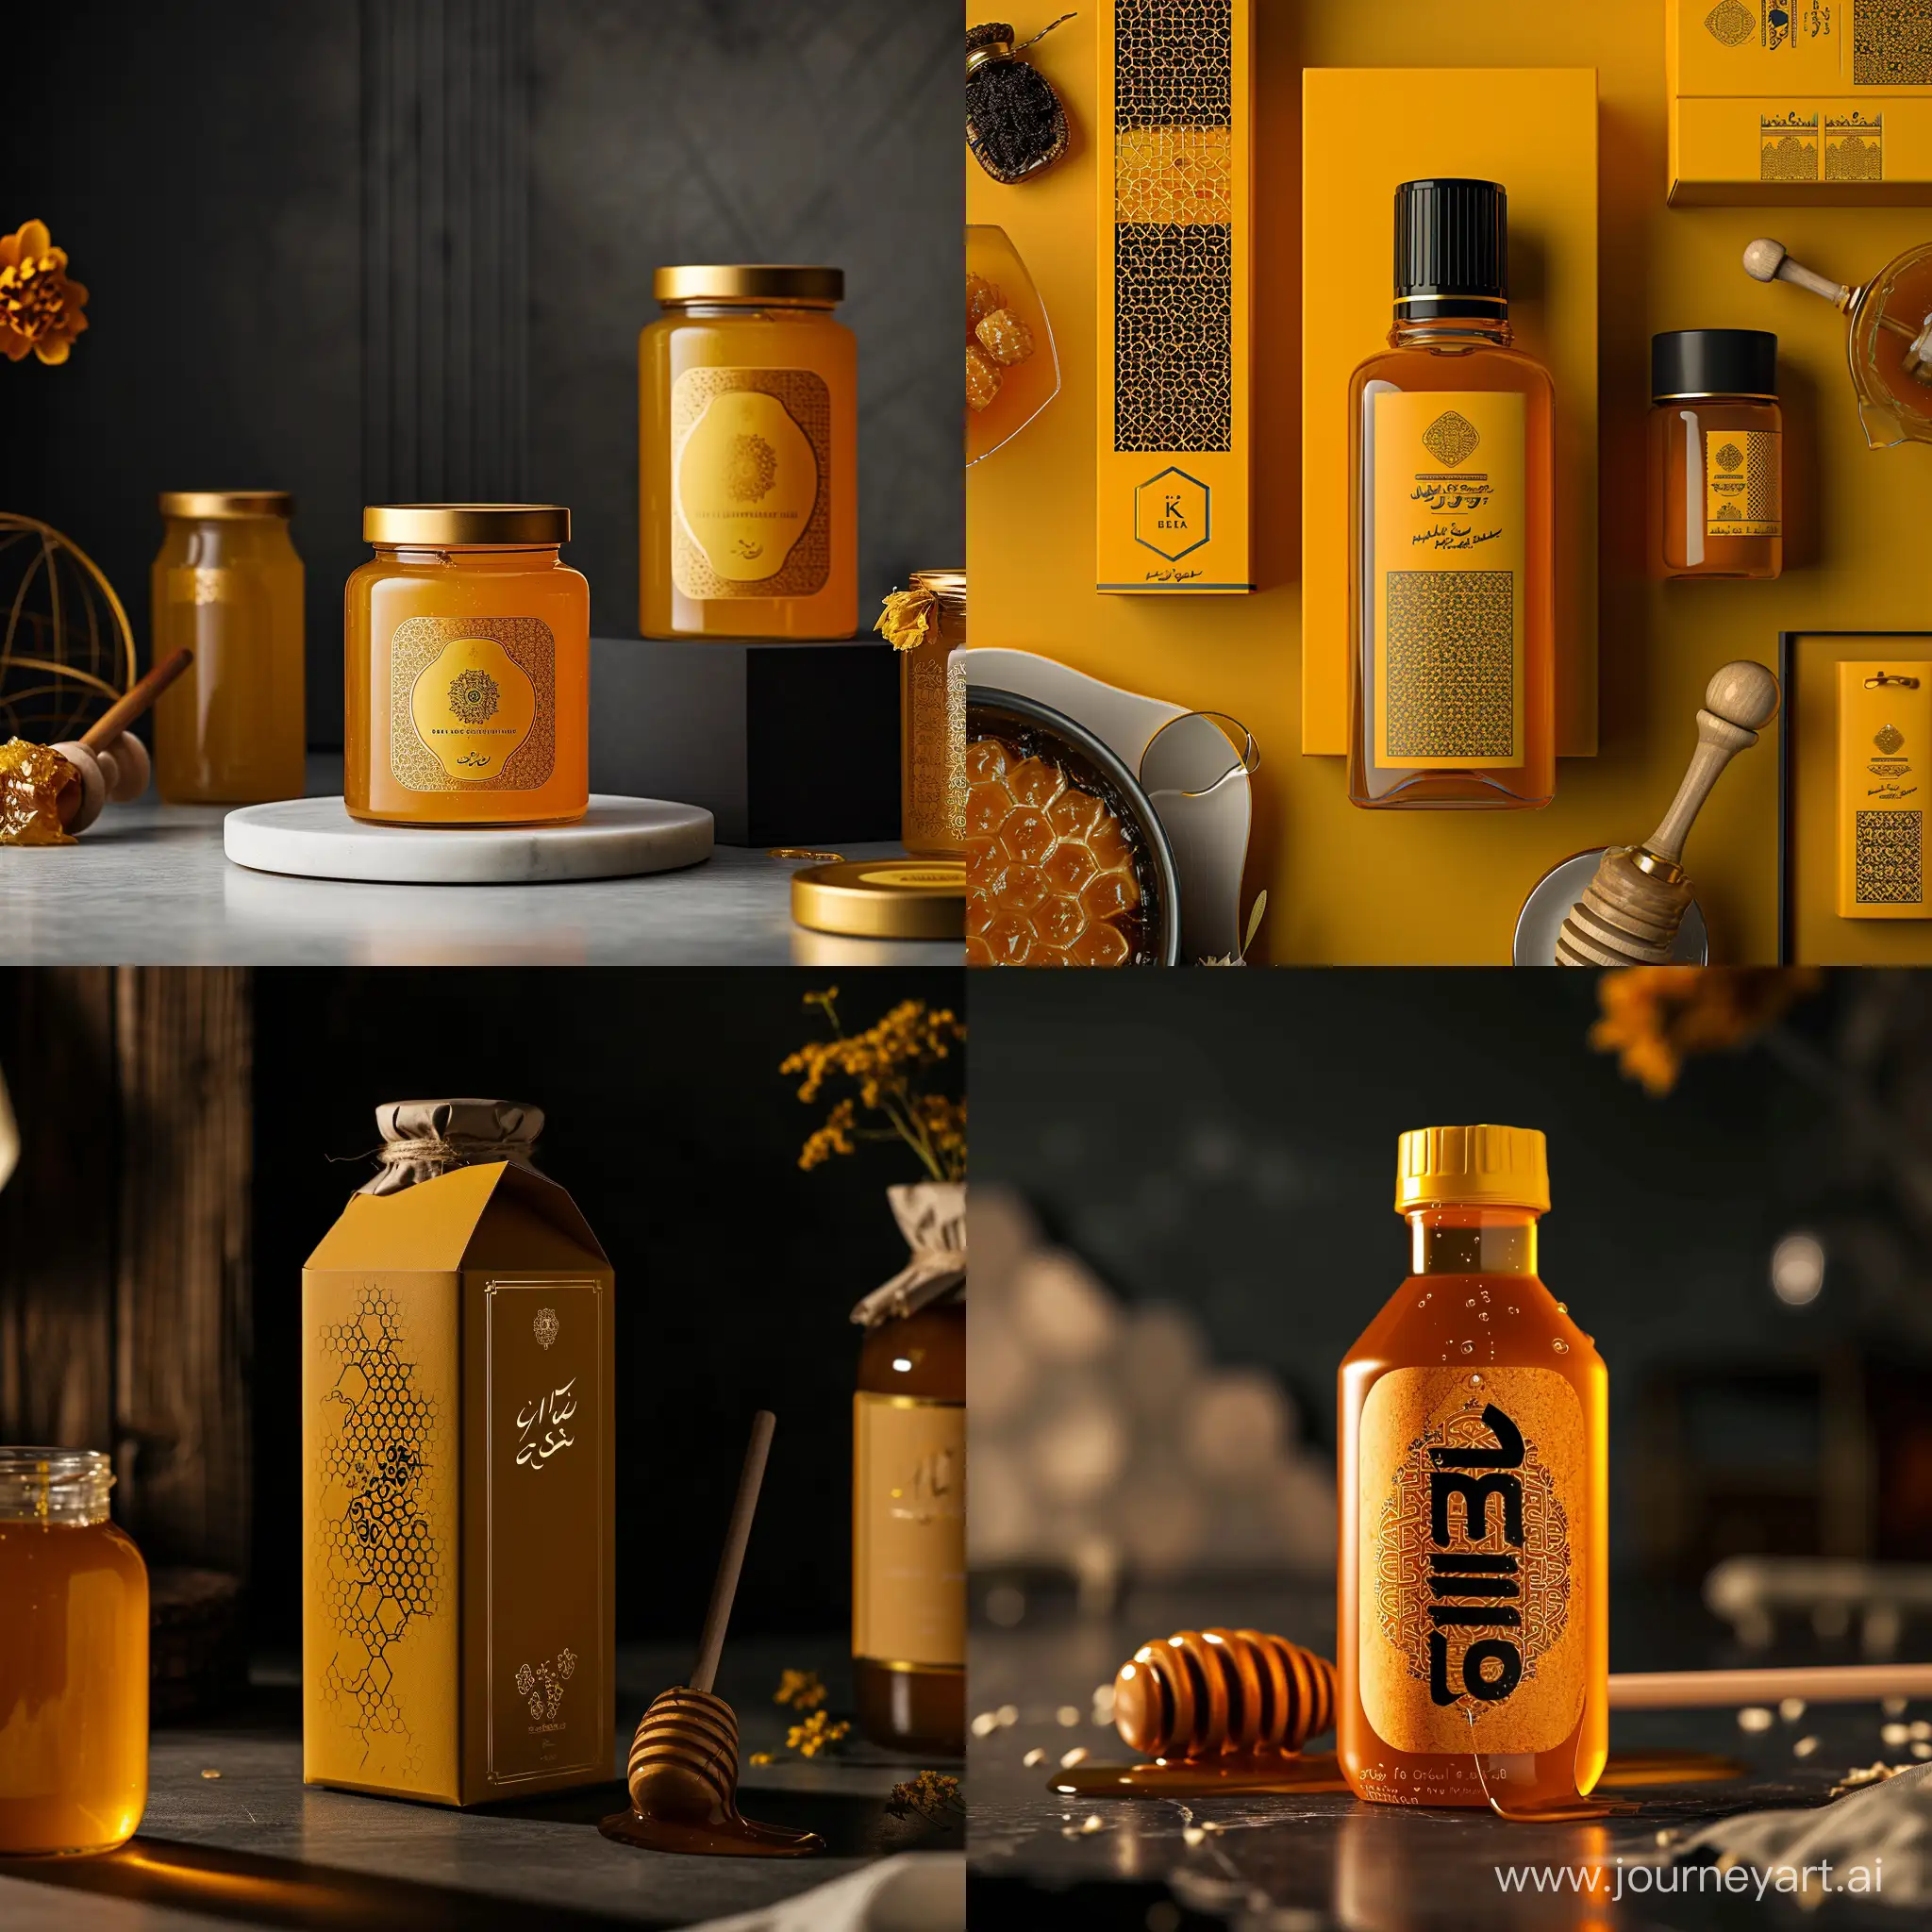 Project: Honey packaging design
Creative, minimal, luxury
Iranian design elements should be used
Take industrial and promotional photos of the product
